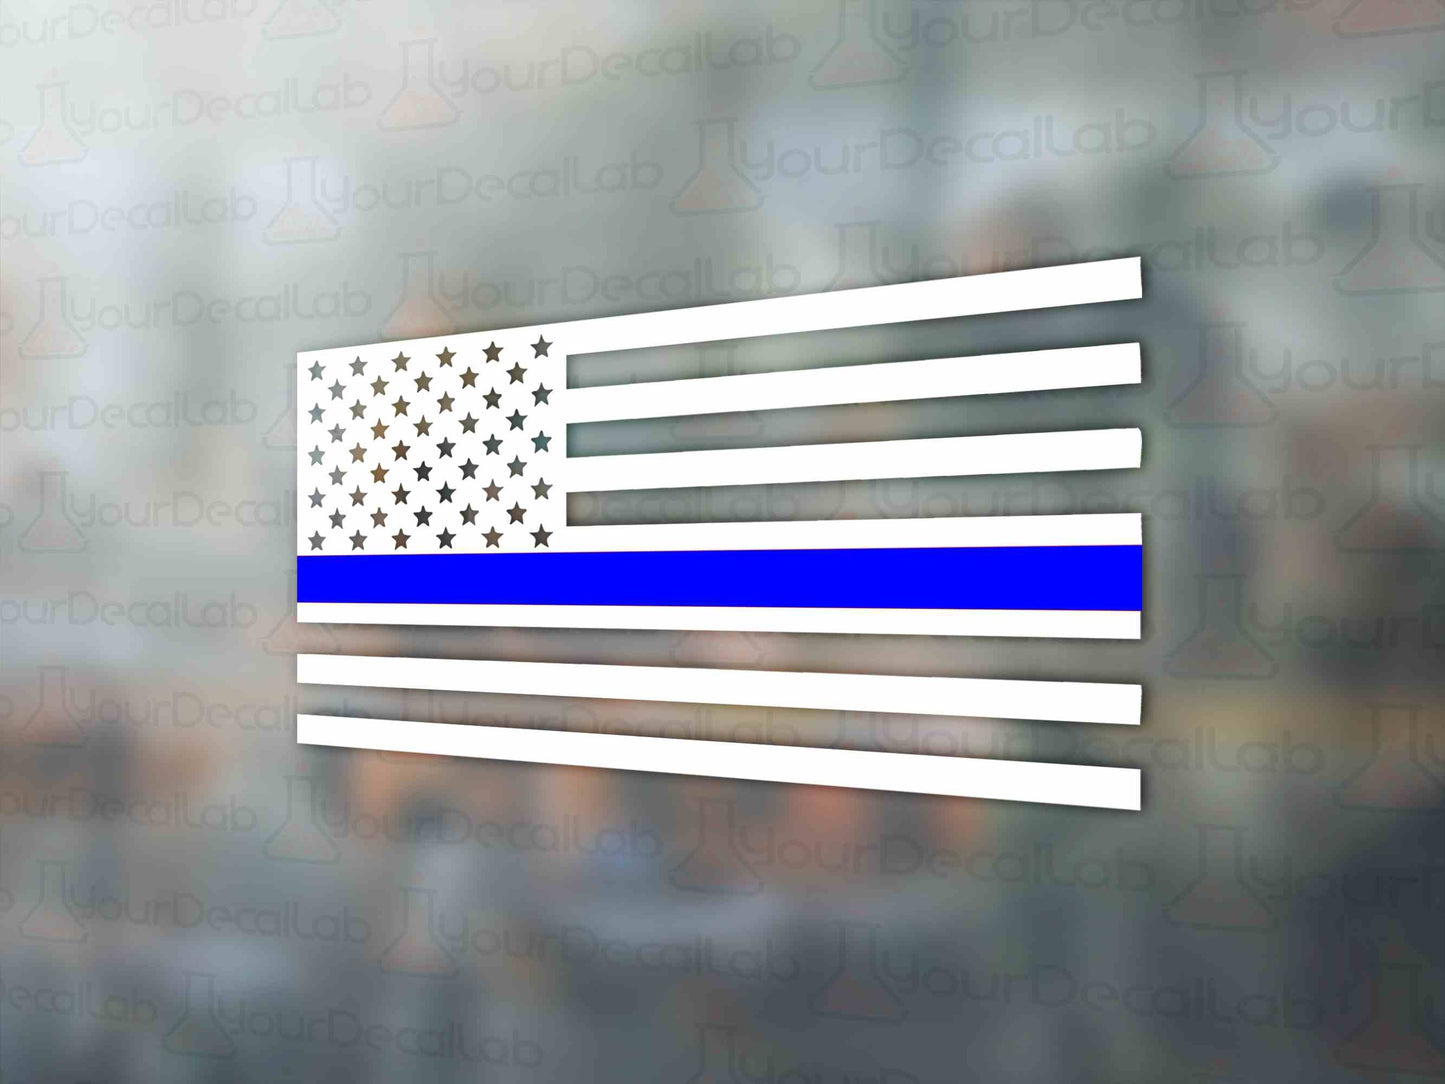 Blue Line Decal American Flag - Many Colors & Sizes